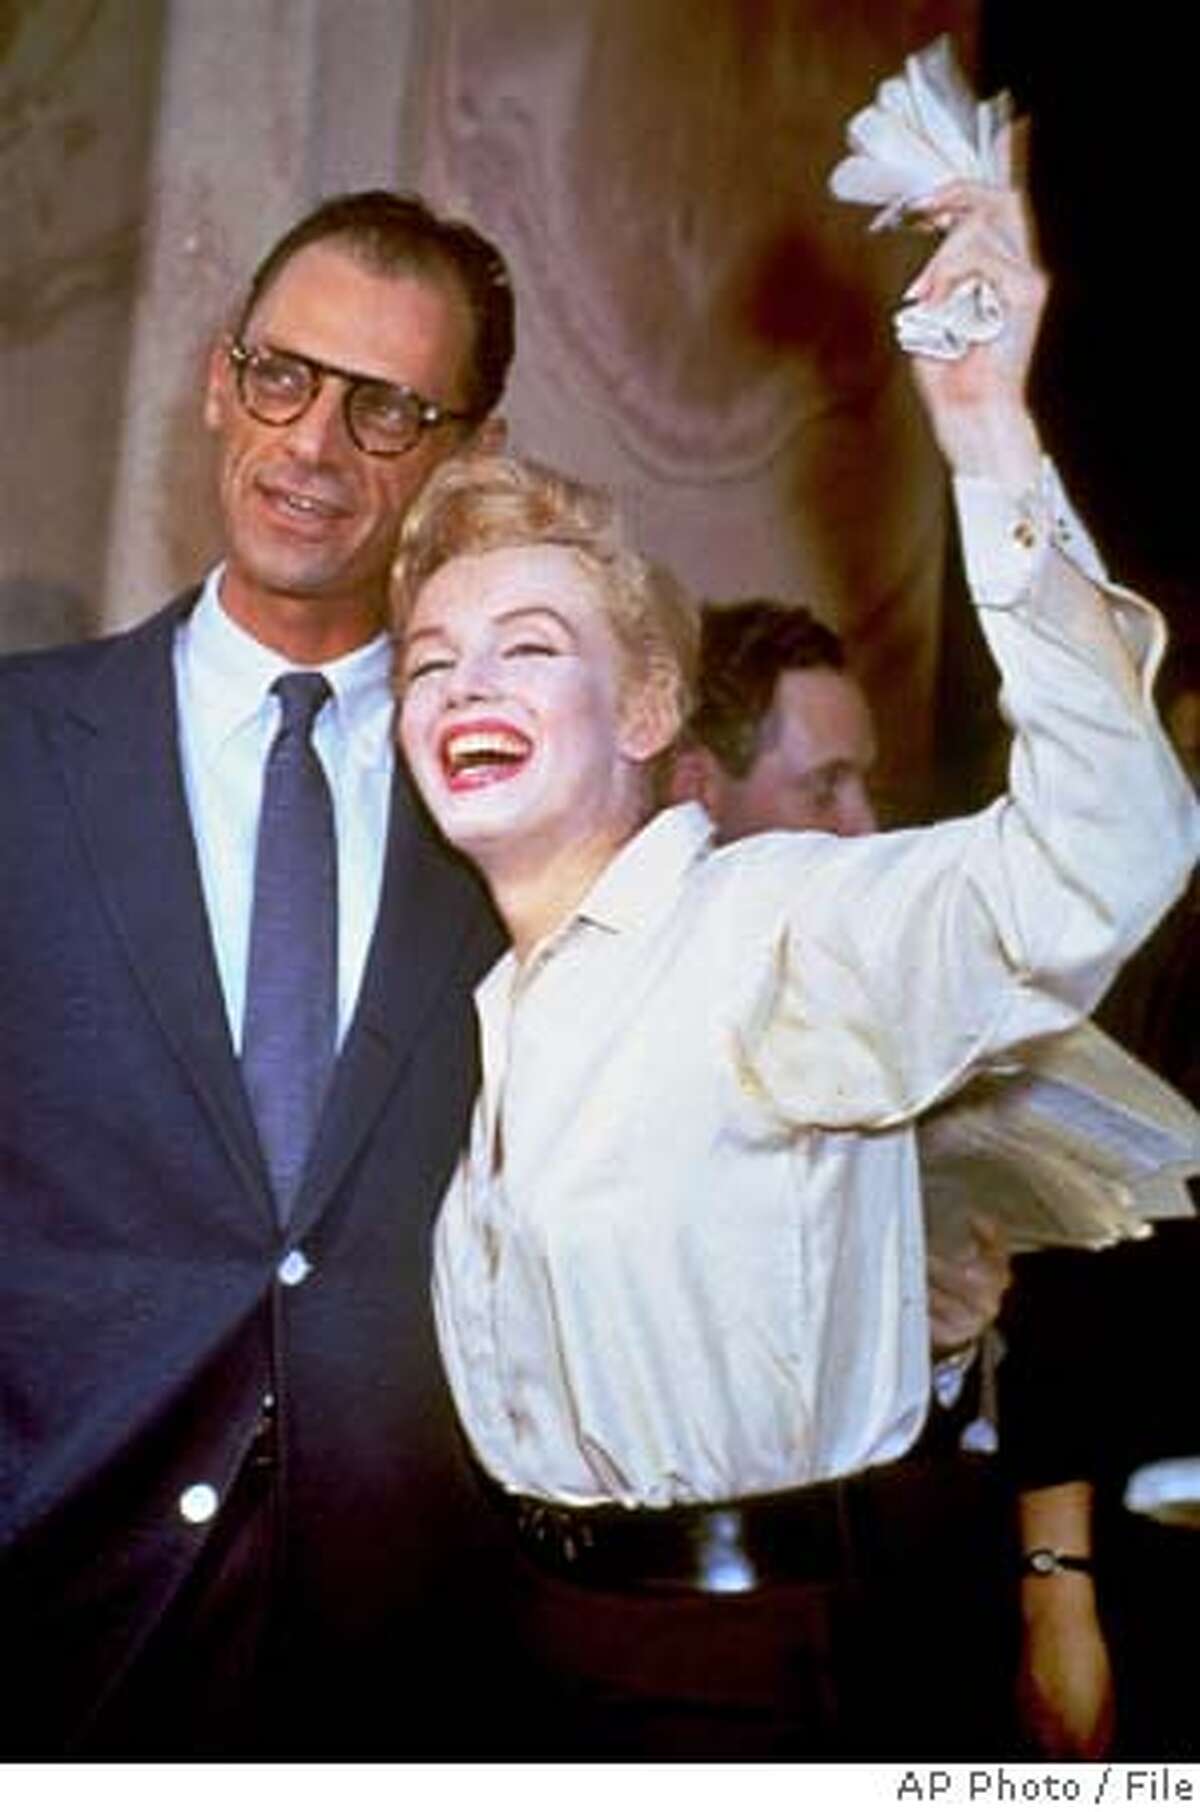 **FILE**Newlyweds Marilyn Monroe and Arthur Miller are shown after their civil wedding ceremony in White Plains, N.Y., on June 29, 1956. Miller, the Pulitzer prize-winning playwright whose most famous fictional creation, Willy Loman in "Death of a Salesman," came to symbolize the American Dream gone awry, has died, his assistant said Friday, Feb. 11, 2005. He was 89. Miller died Thursday evening, said his assistant, Julia Bolus. (AP Photo) A JUNE 26 1956 FILE PHOTO